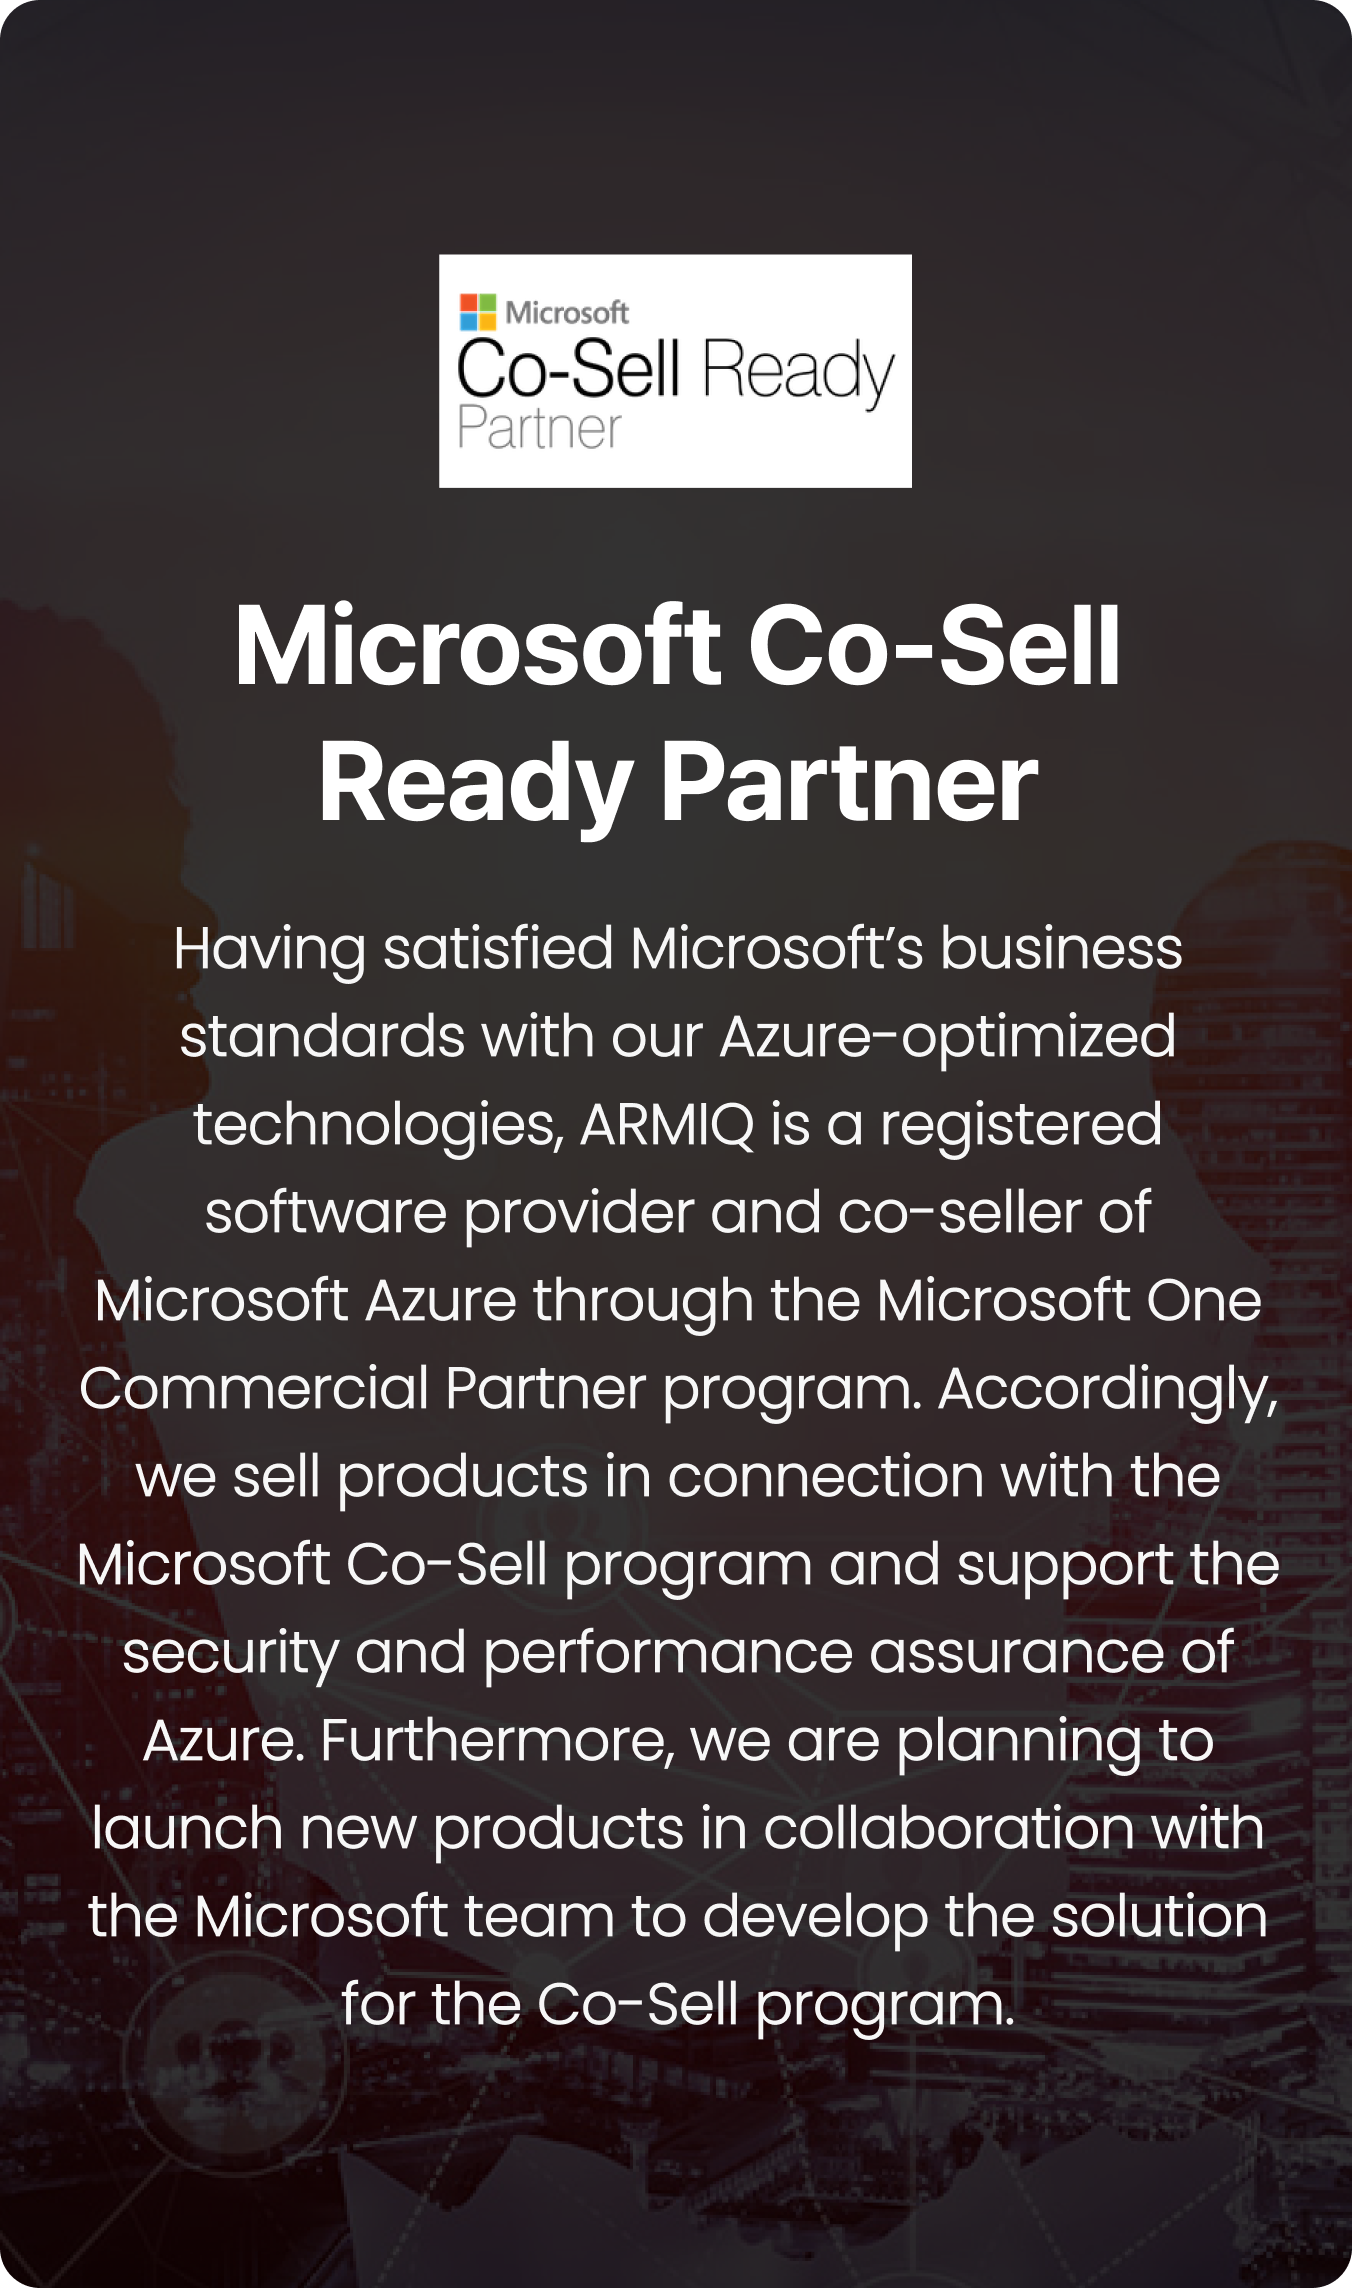 Having satisfied Microsoft’s business standards with our Azure-optimized technologies, ARMIQ is a registered software provider and co-seller of Microsoft Azure through the Microsoft One Commercial Partner program. Accordingly, we sell products in connection with the Microsoft Co-Sell program and support the security and performance assurance of Azure. Furthermore, we are planning to launch new products in collaboration with the Microsoft team to develop the solution for the Co-Sell program.